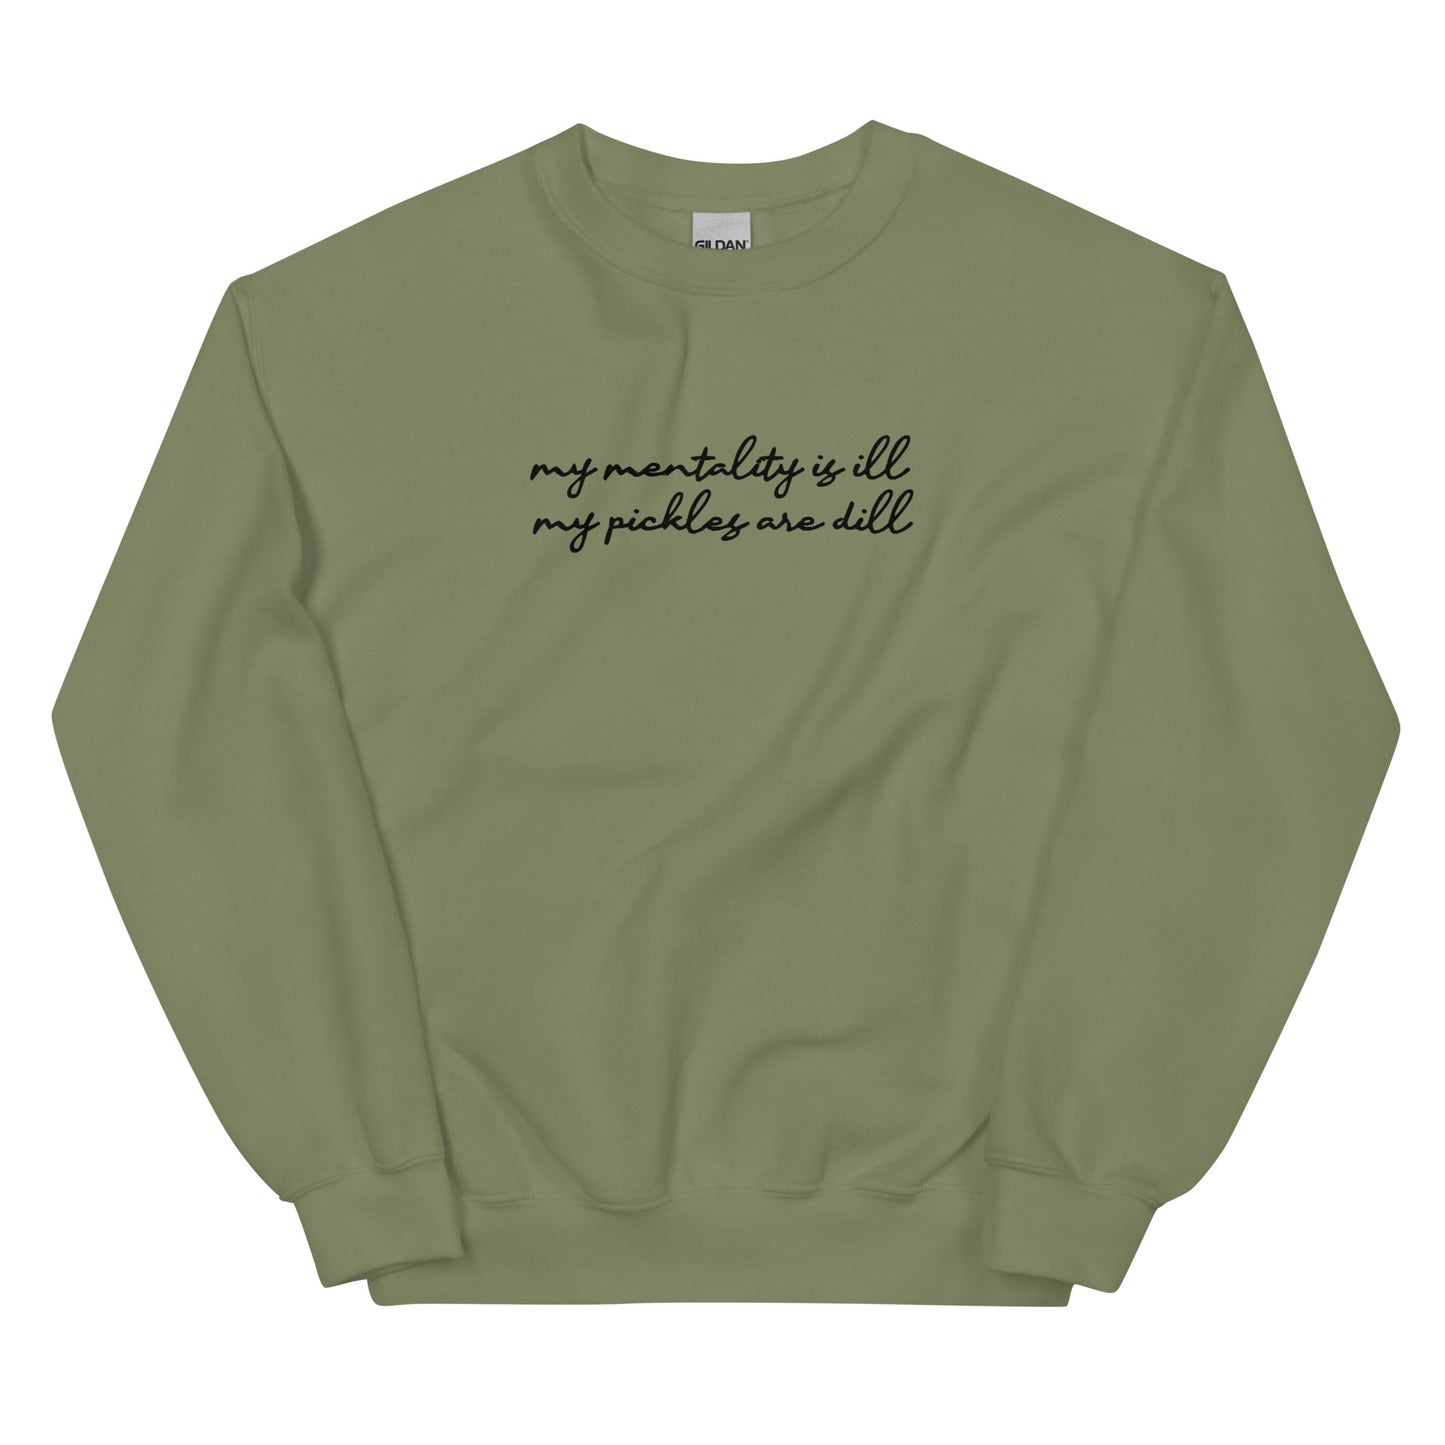 Mentality is Ill, Pickles are Dill (Embroidered) Unisex Sweatshirt